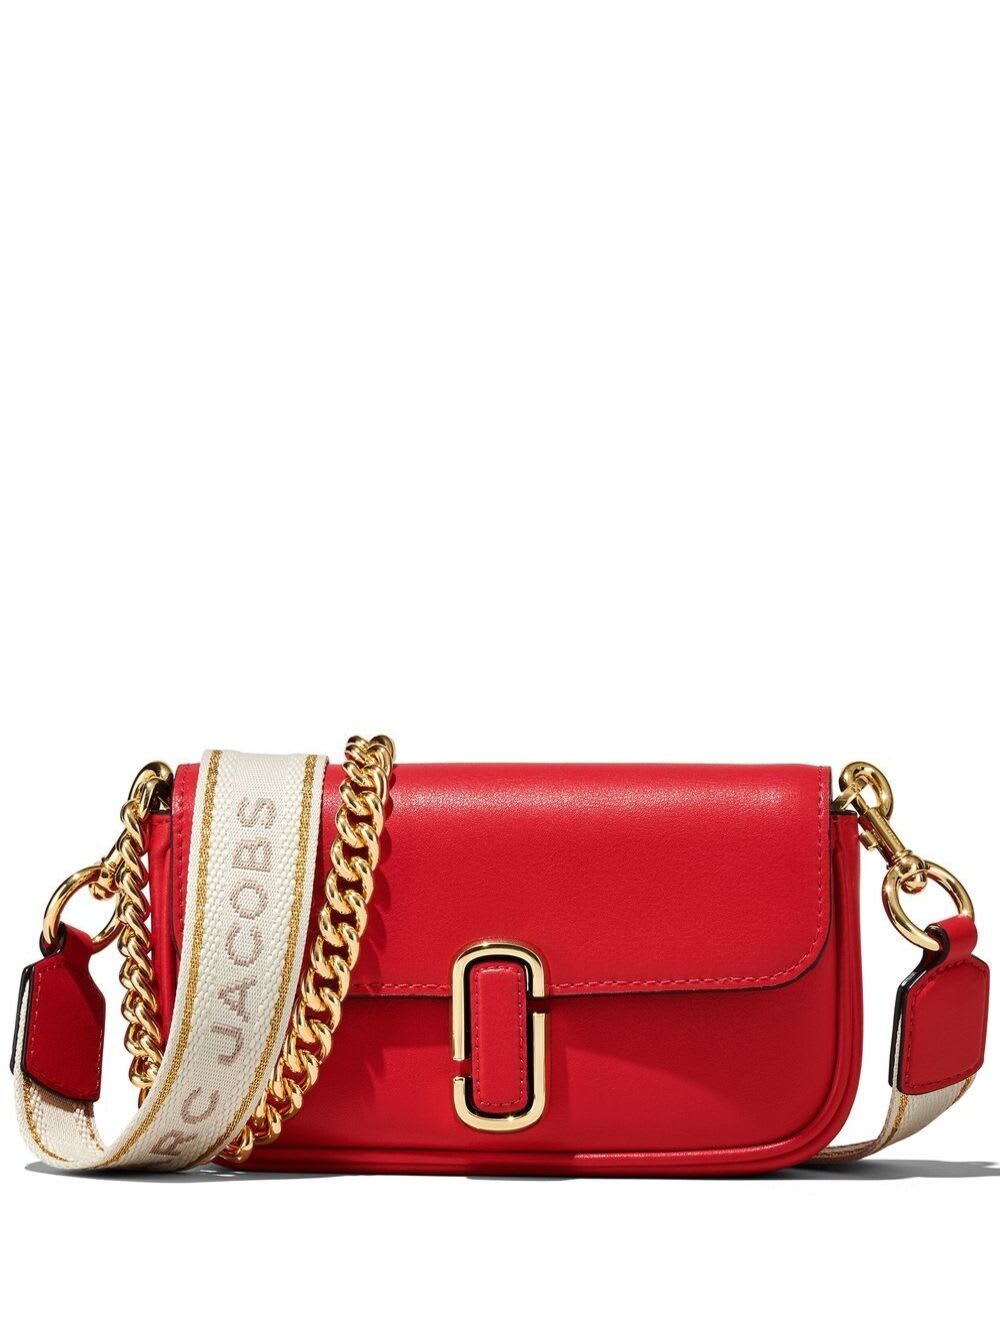 MARC JACOBS J MARC MINI RED SHOULDER BAG WITH LOGO BUCKLE IN SMOOTH LEATHER WOMAN